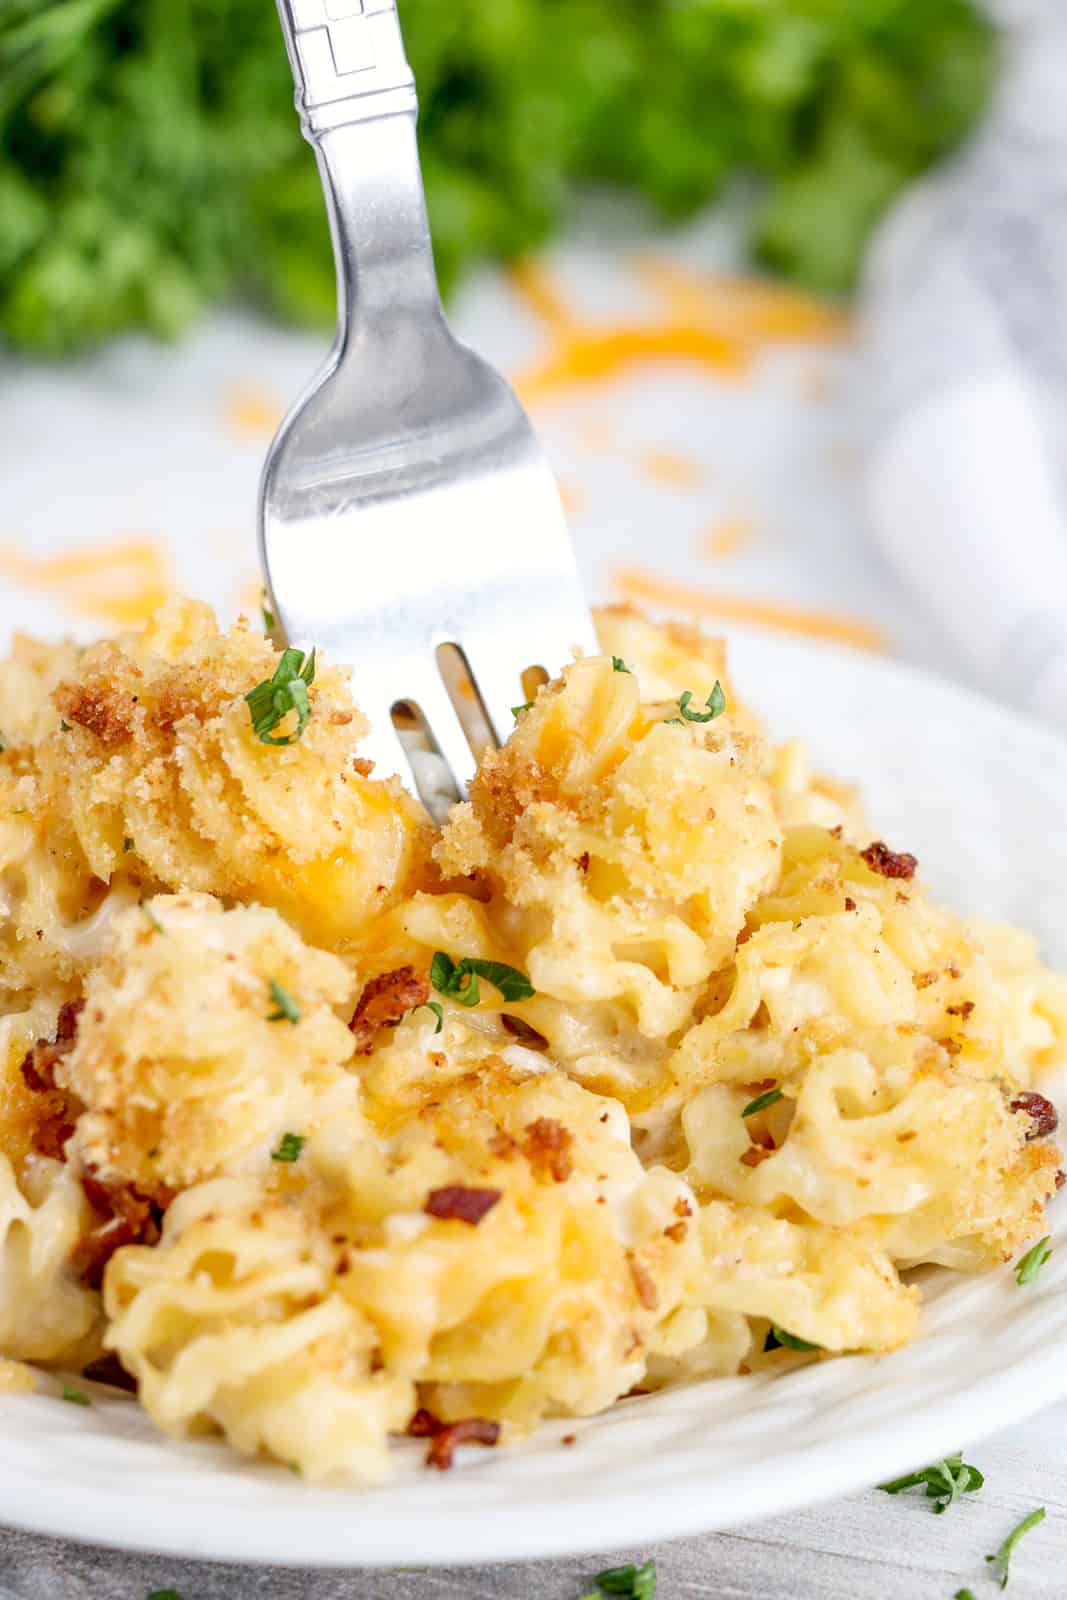 Fork poking into plate of Bacon Mac and Cheese